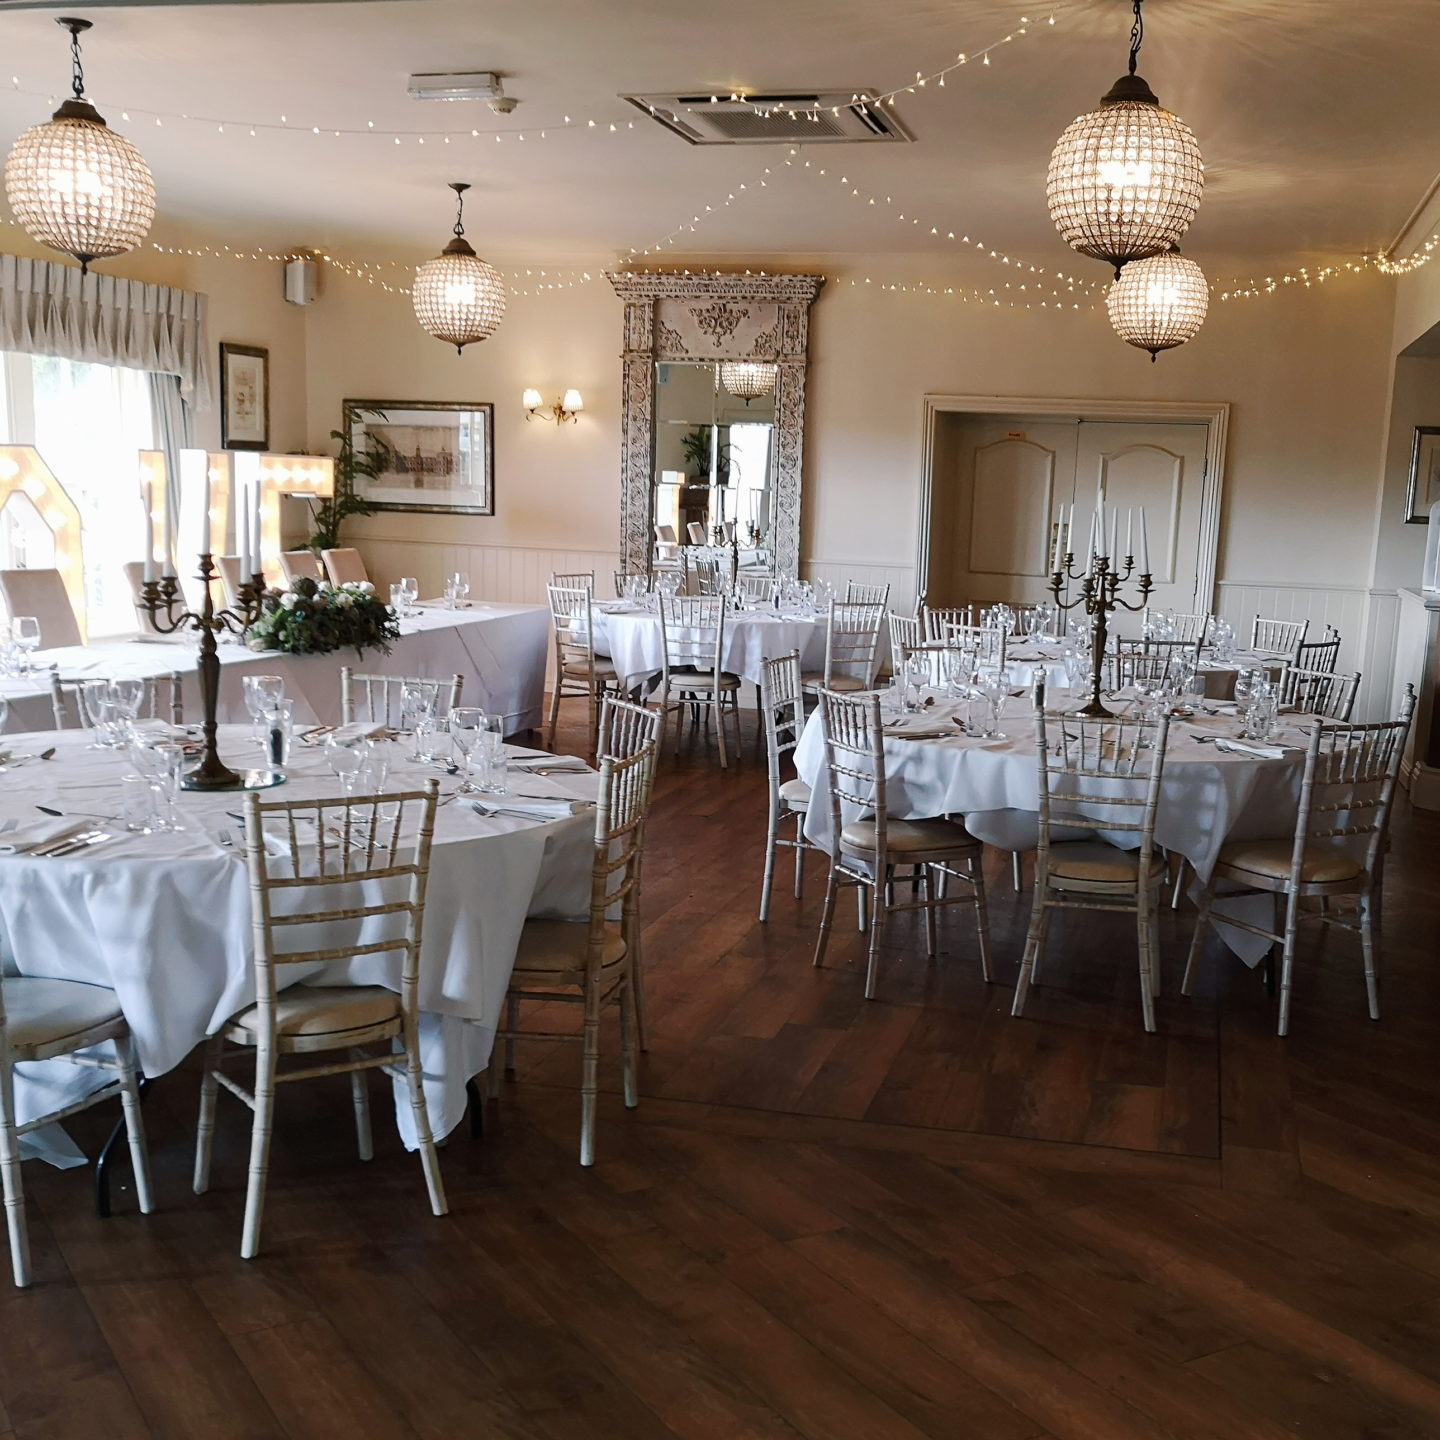 Searching For A Wedding Venue?